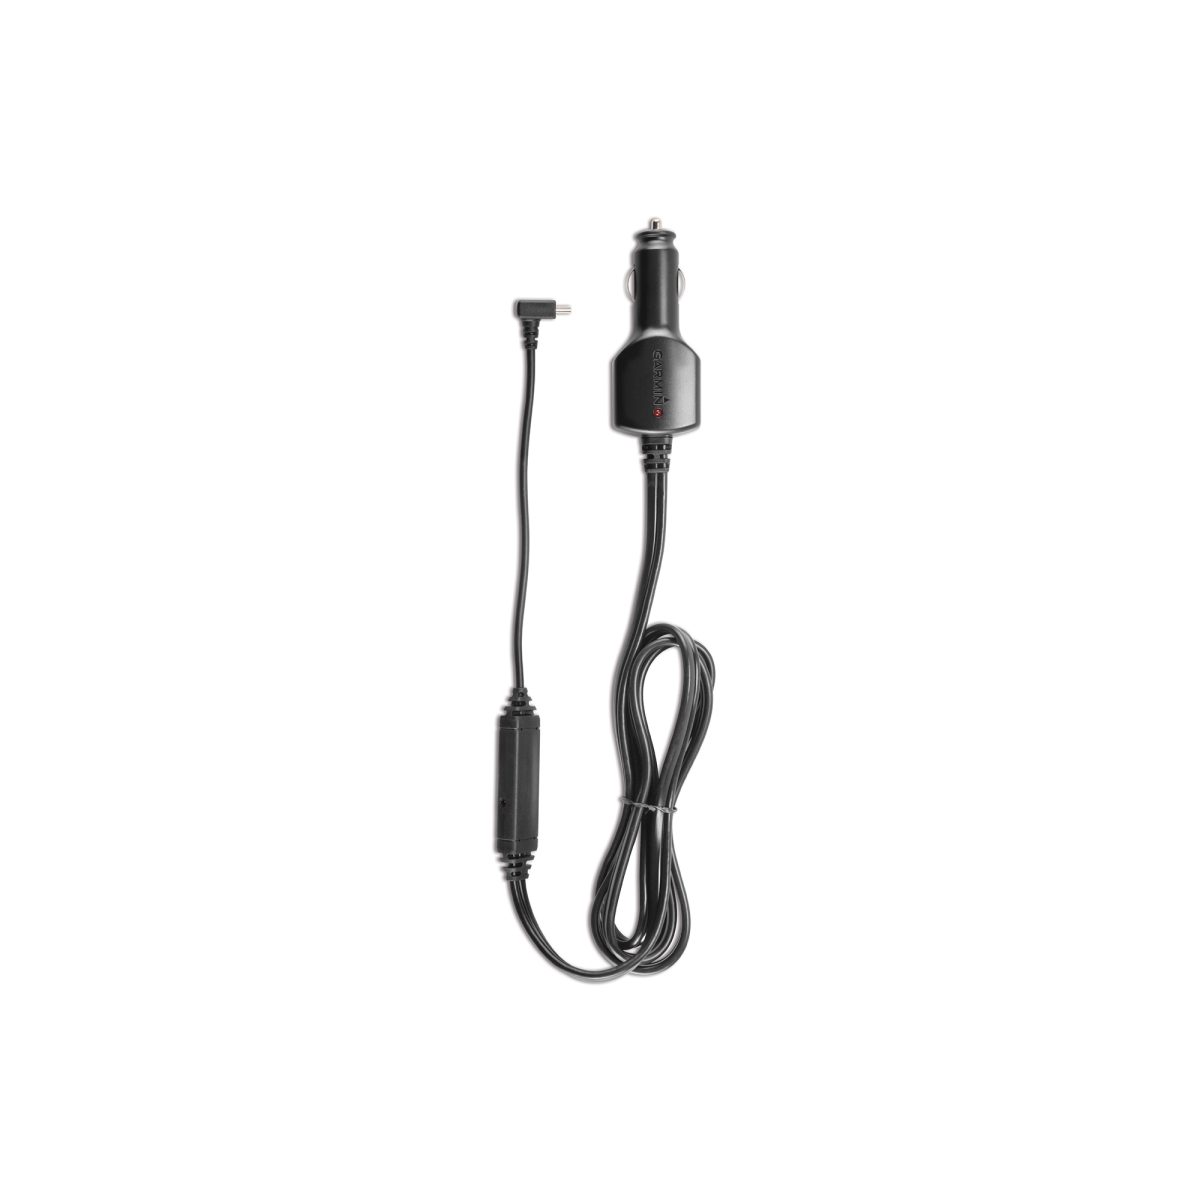 Garmin Antenna Extension Cable with Suction Cups for GTM 60 Traffic Receivers 